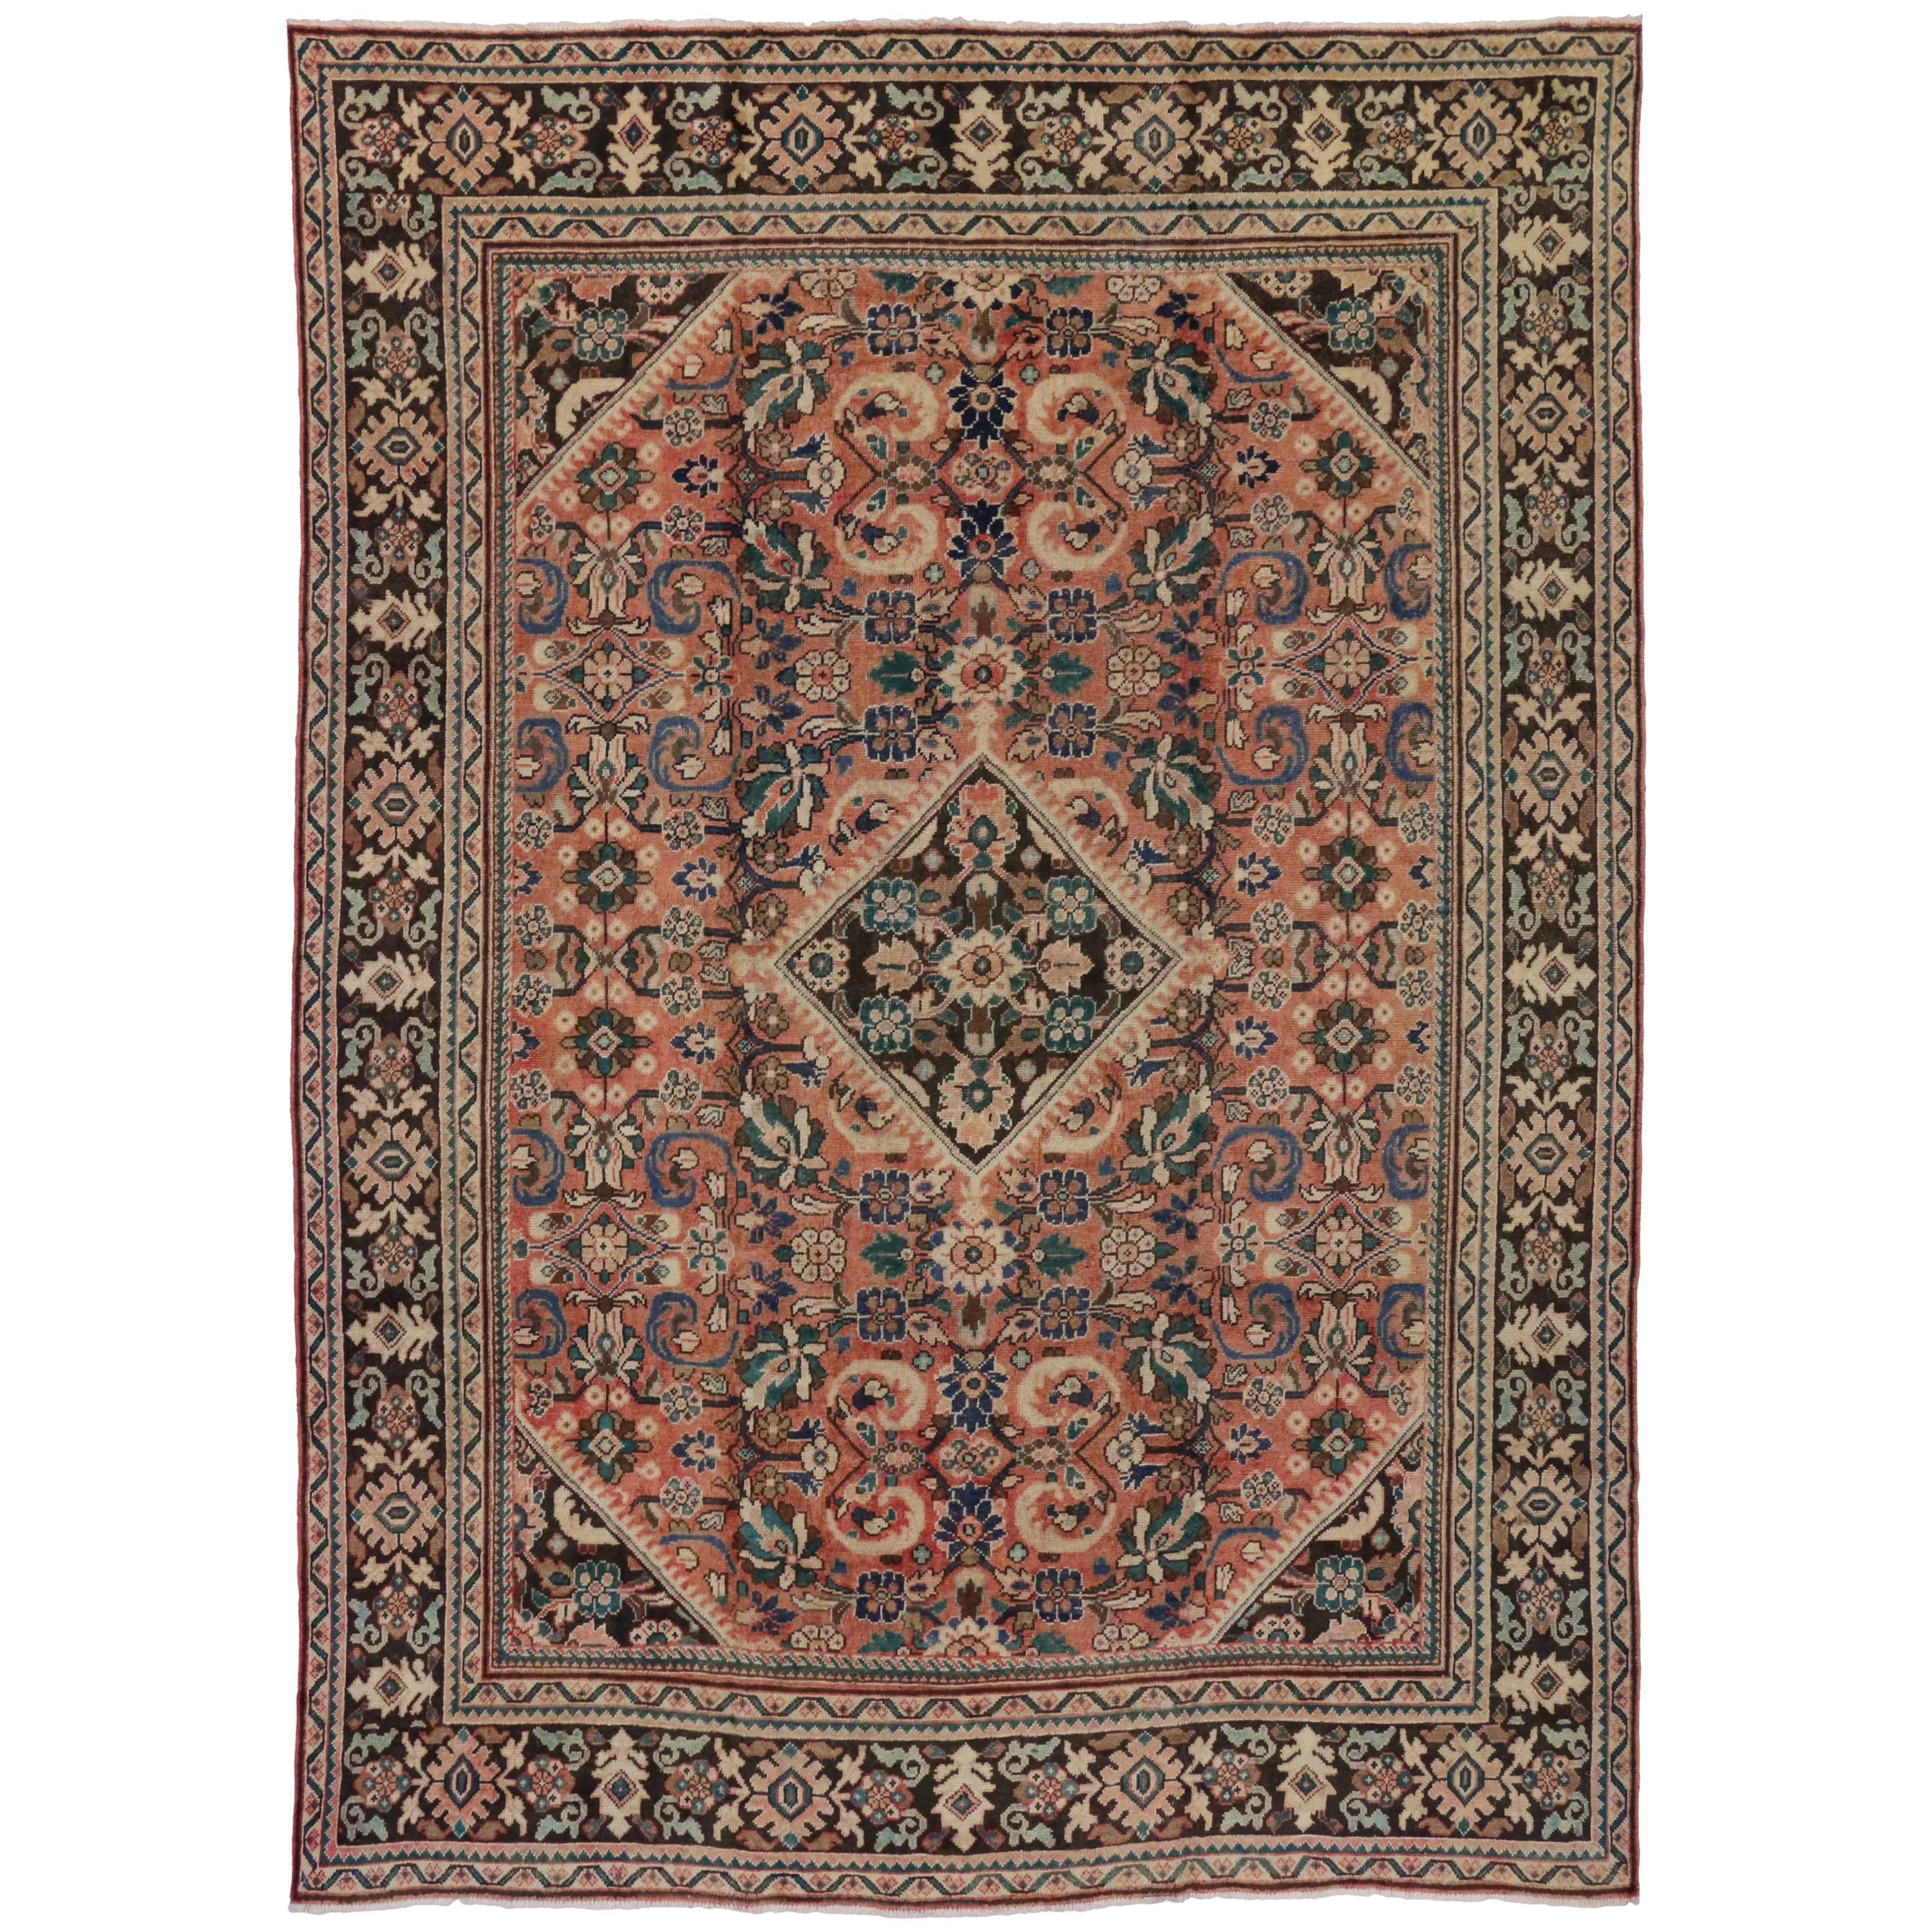 Antique Persian Mahal Rug with Arts & Crafts Style